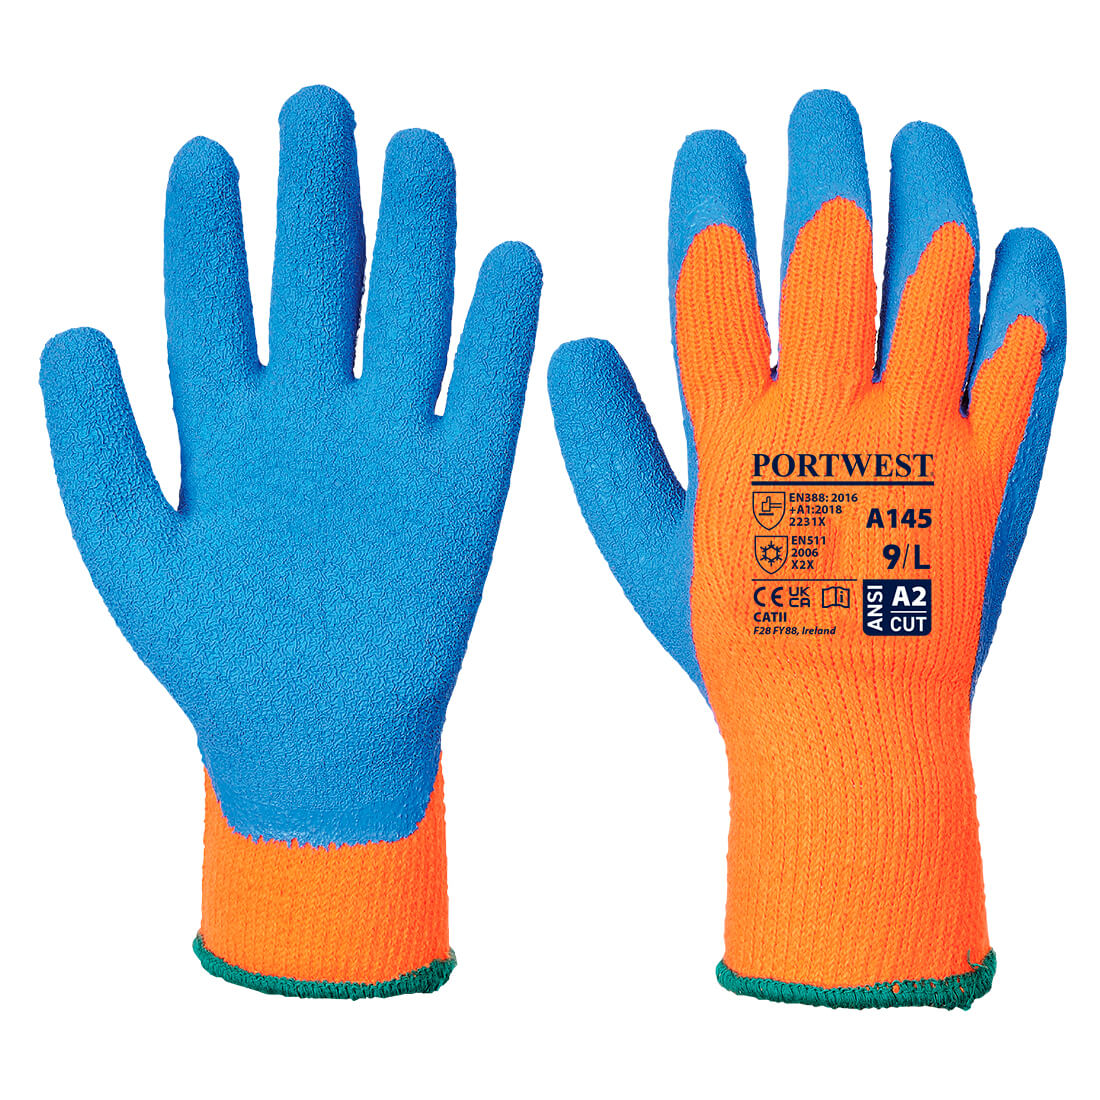 Hand Protection, Cold Protection